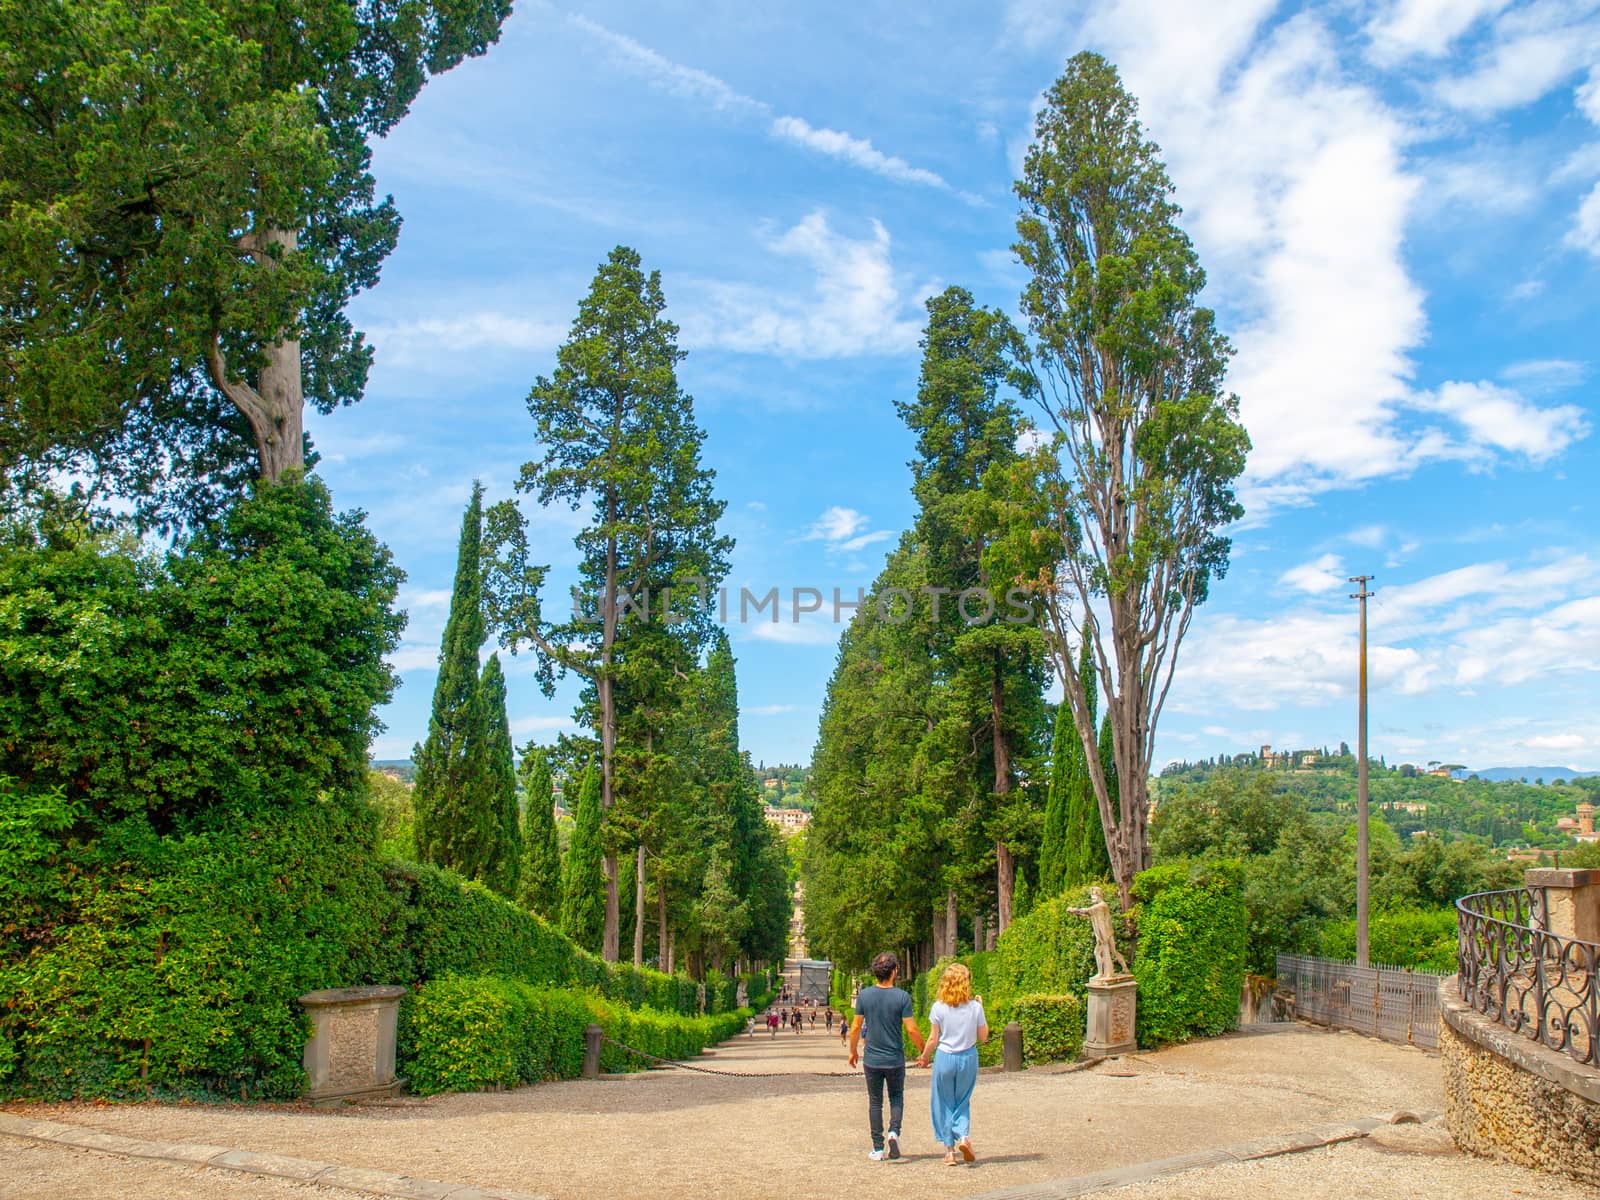 Young romantic pair in Boboli Gardens in Florence, Tuscany, Italy by pyty